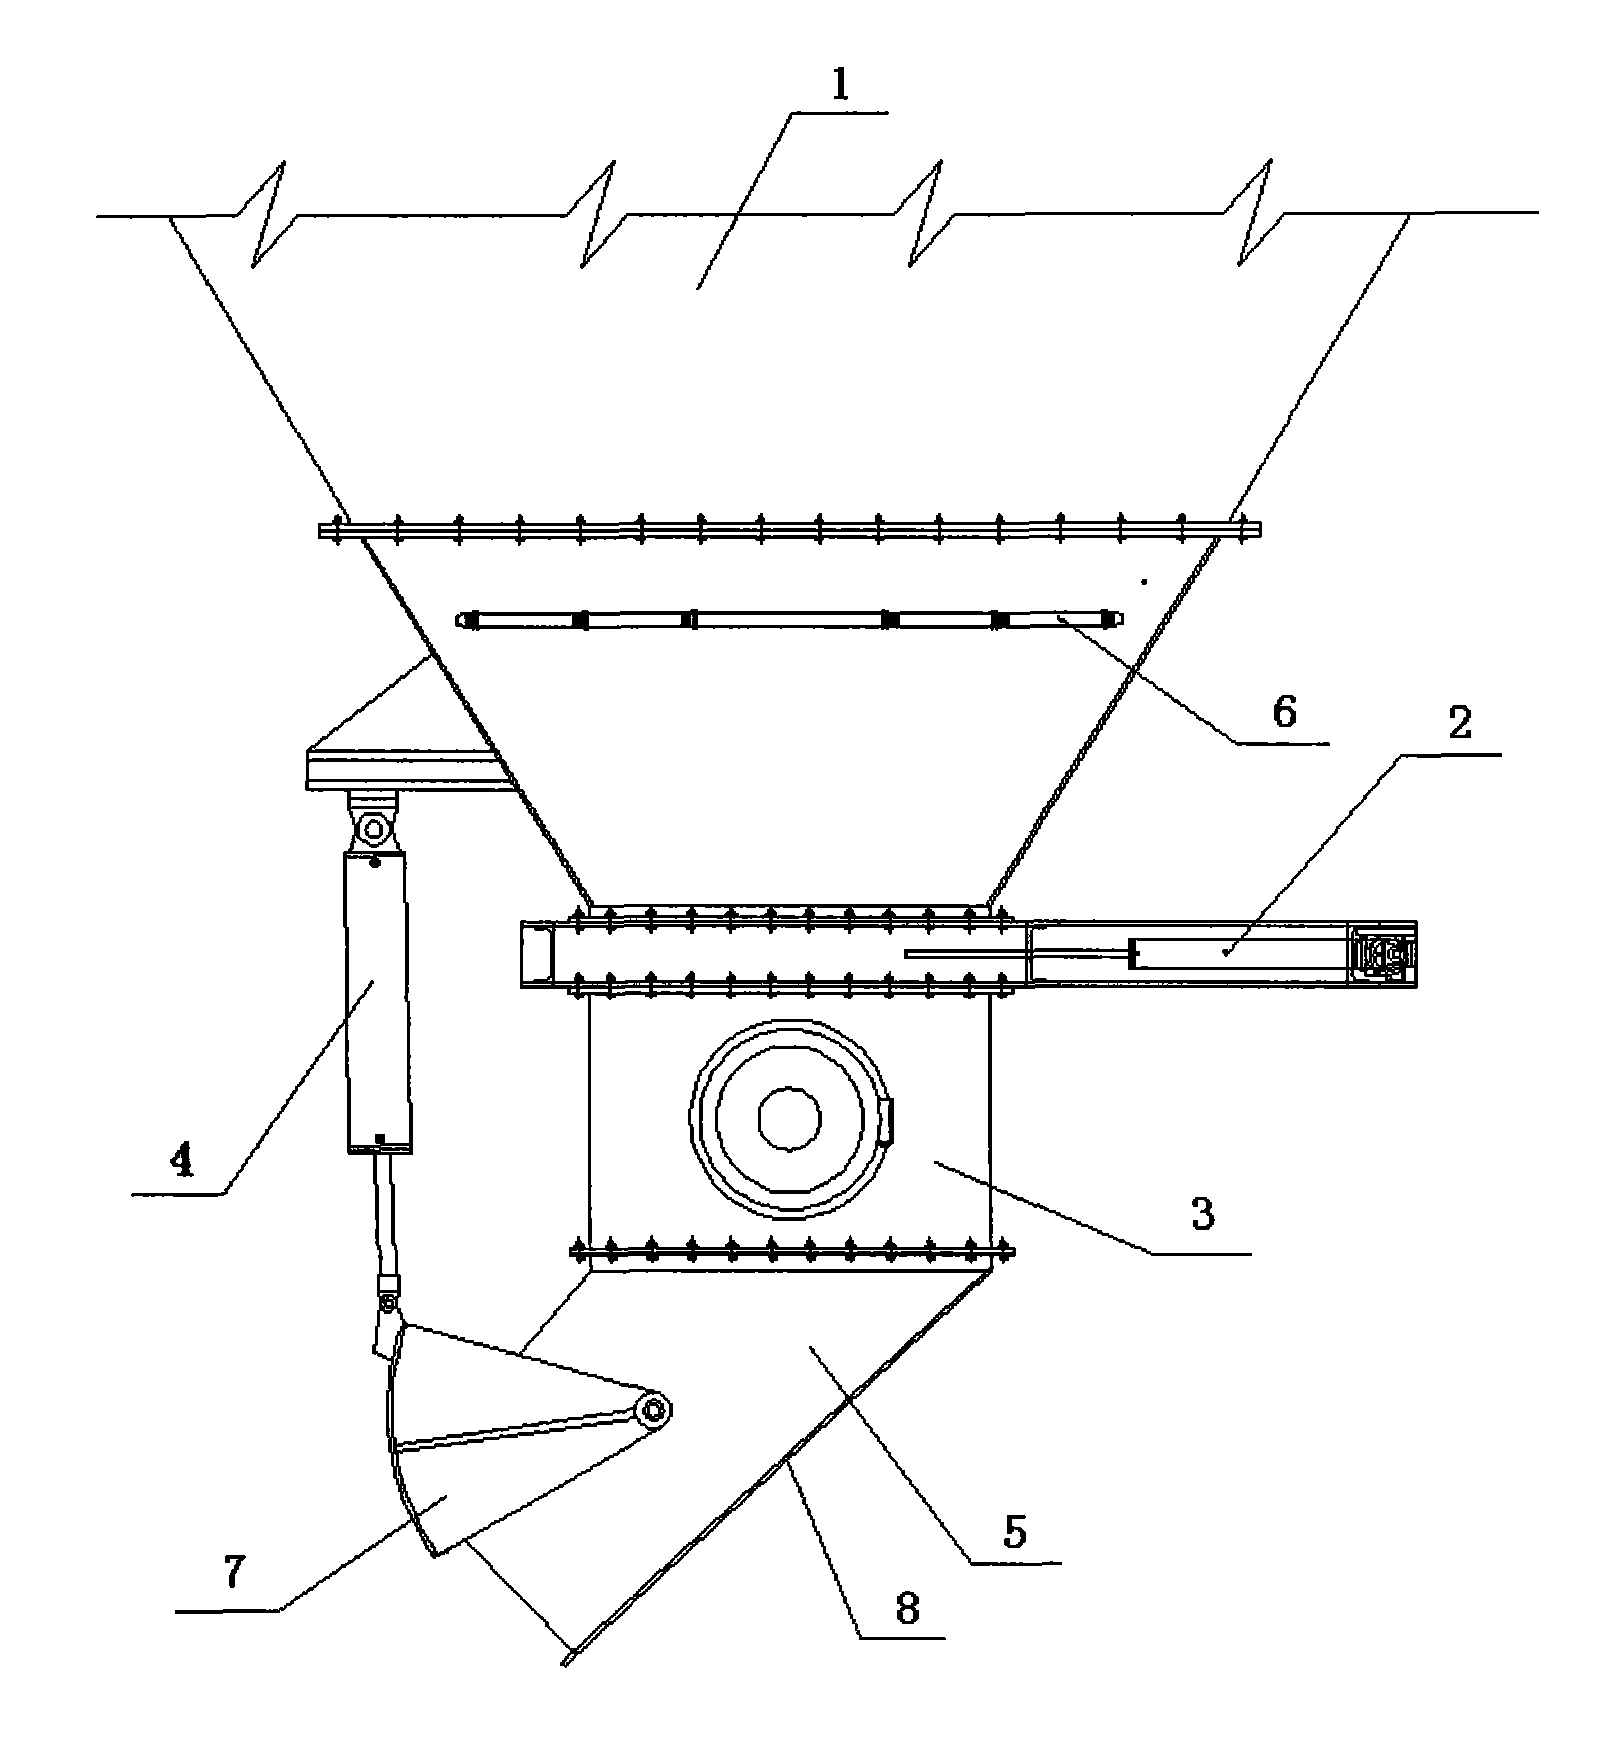 Electrical hydraulic combined discharging device